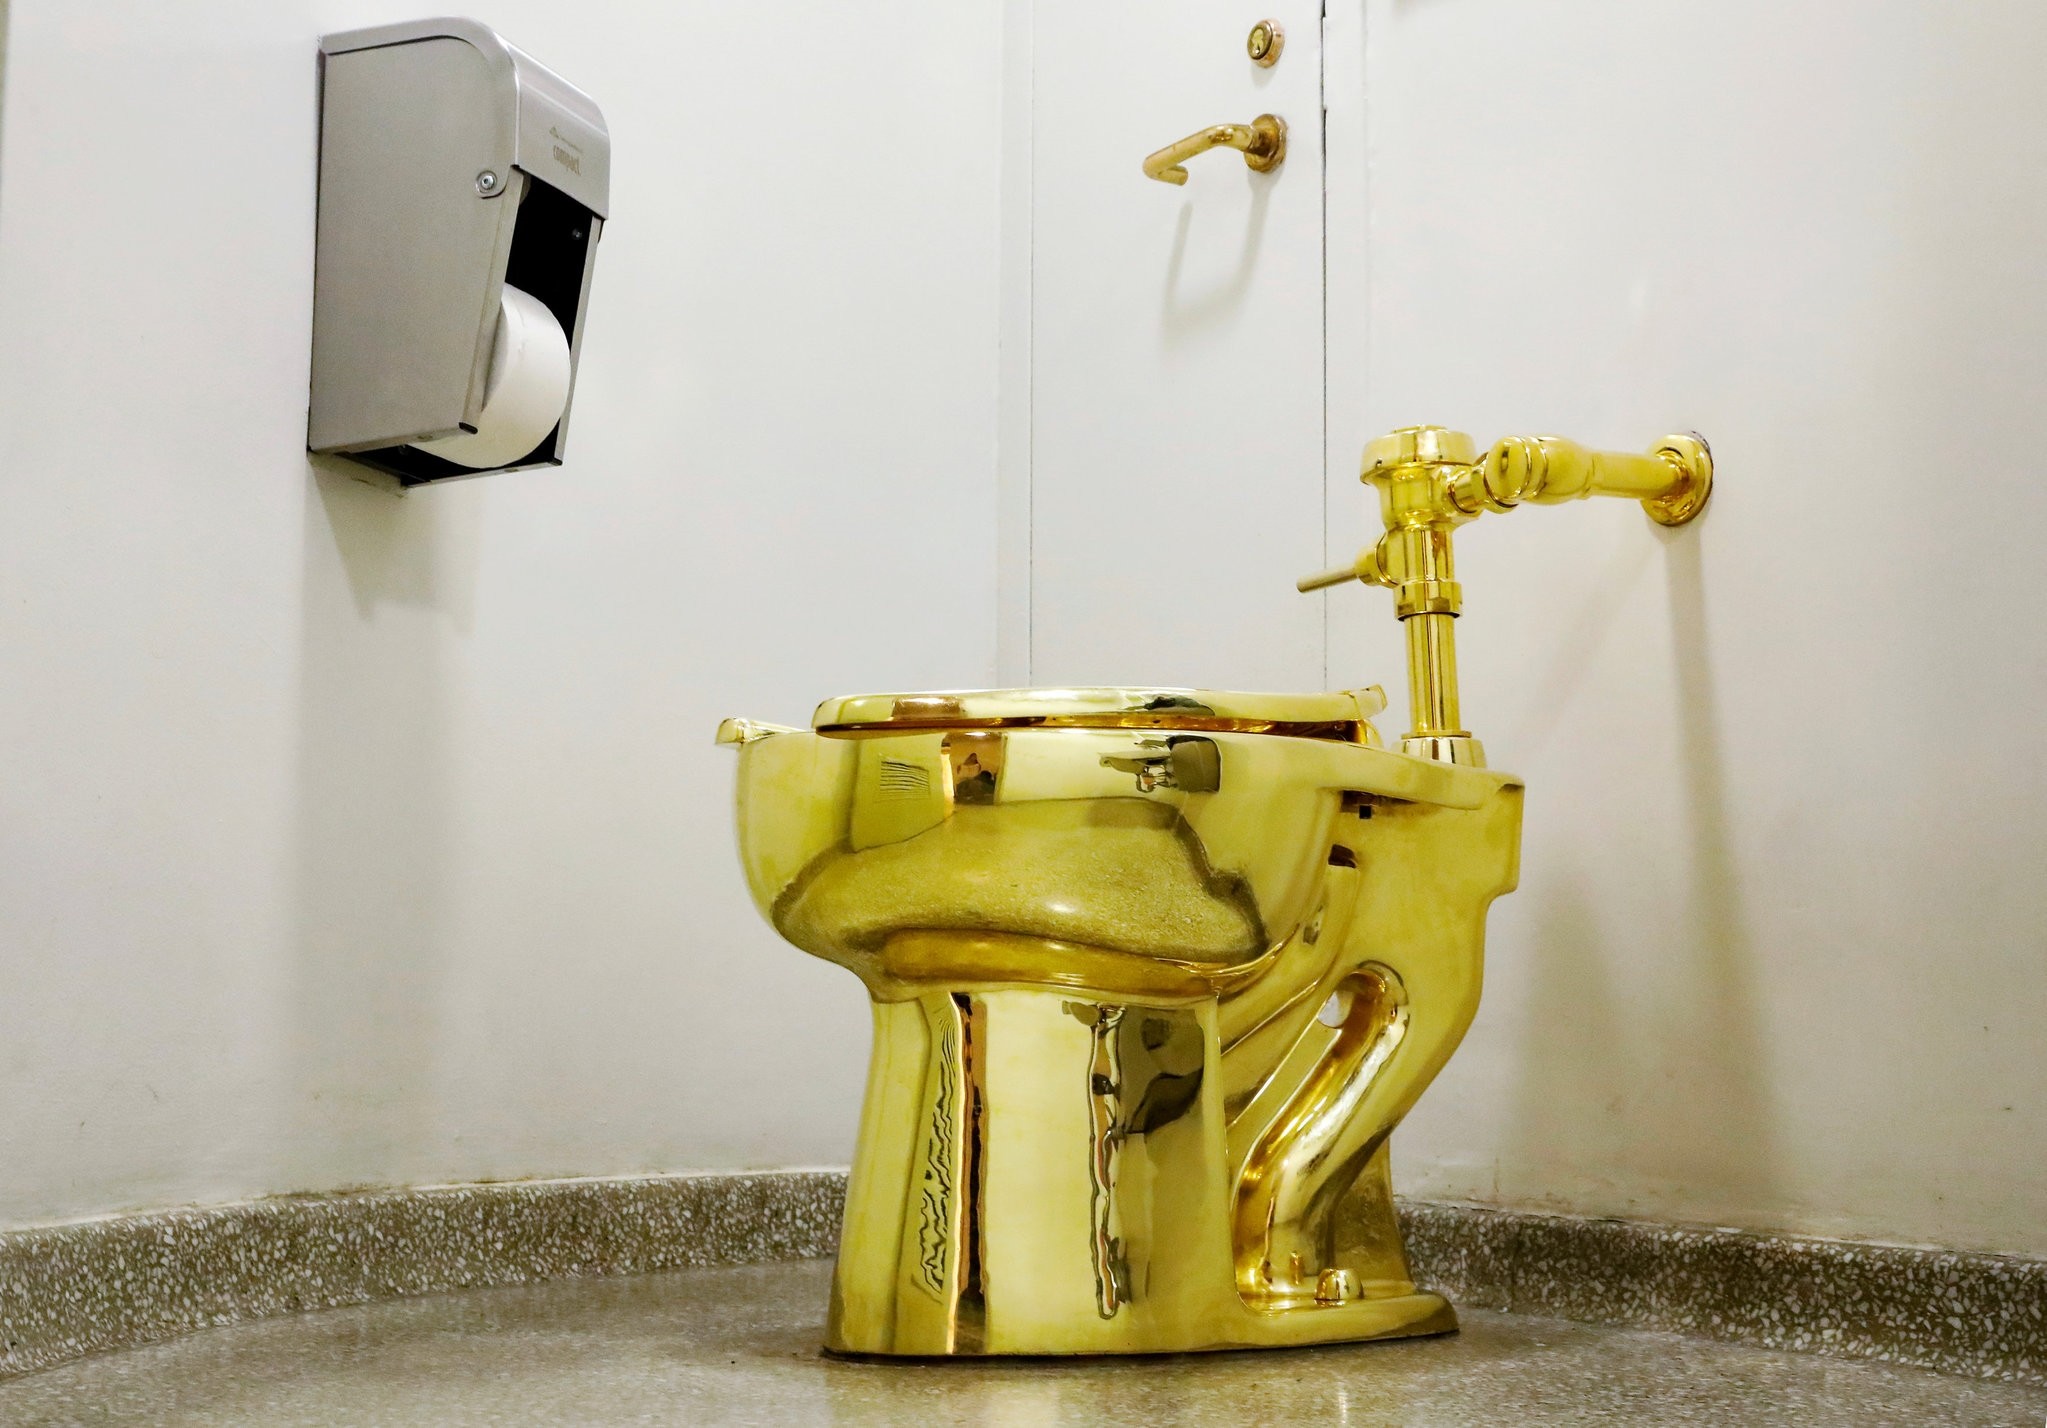 Functional gold toilet named 'America' to open to public at US